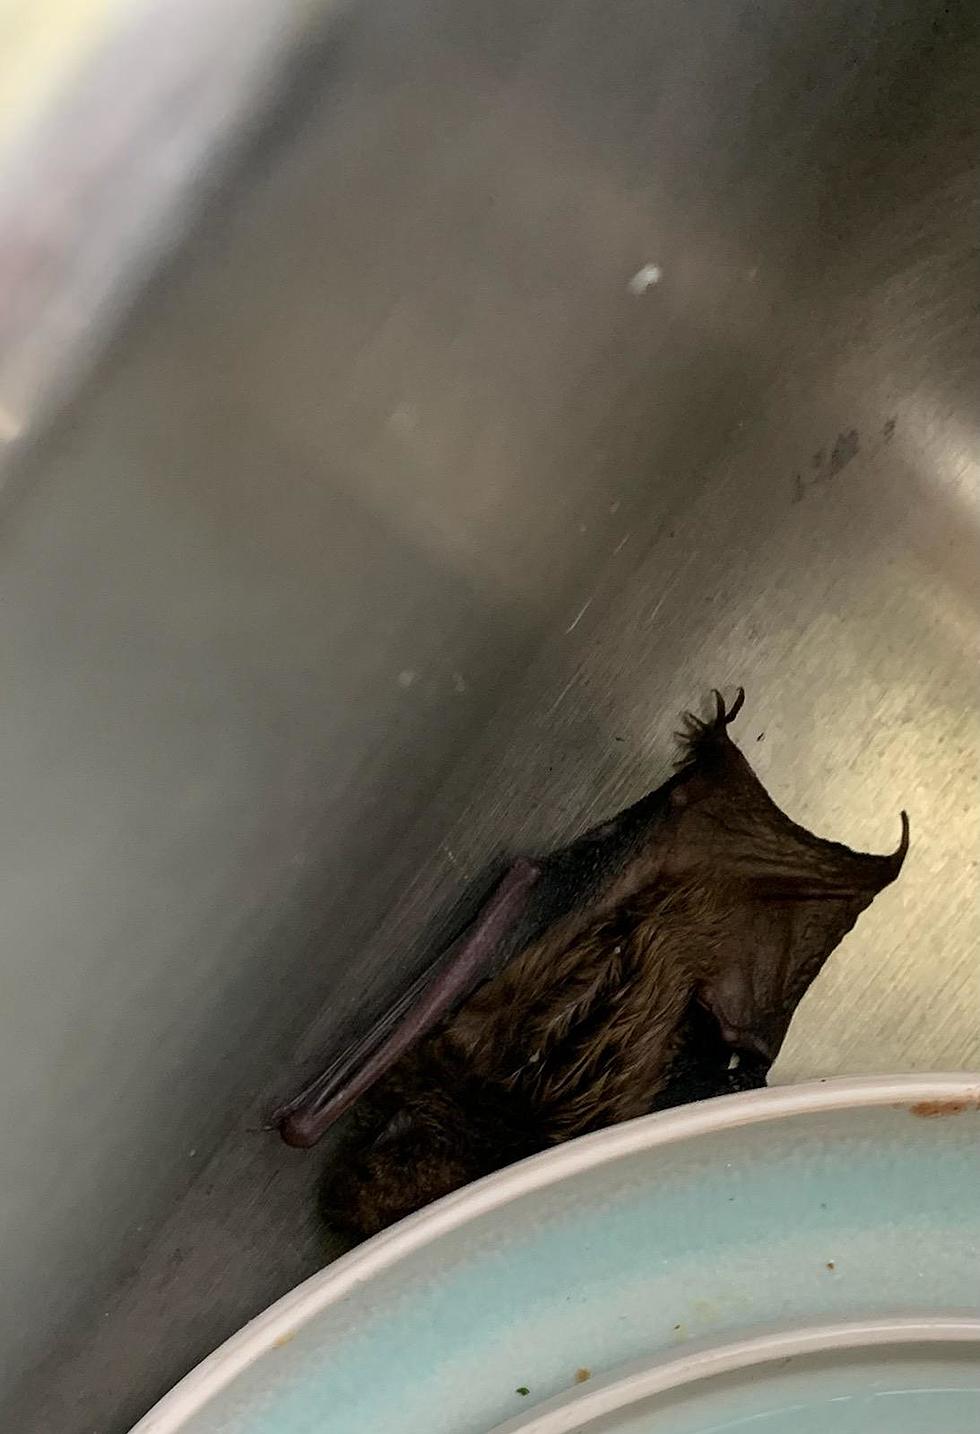 Why Do Bats Keep Getting Into My House?